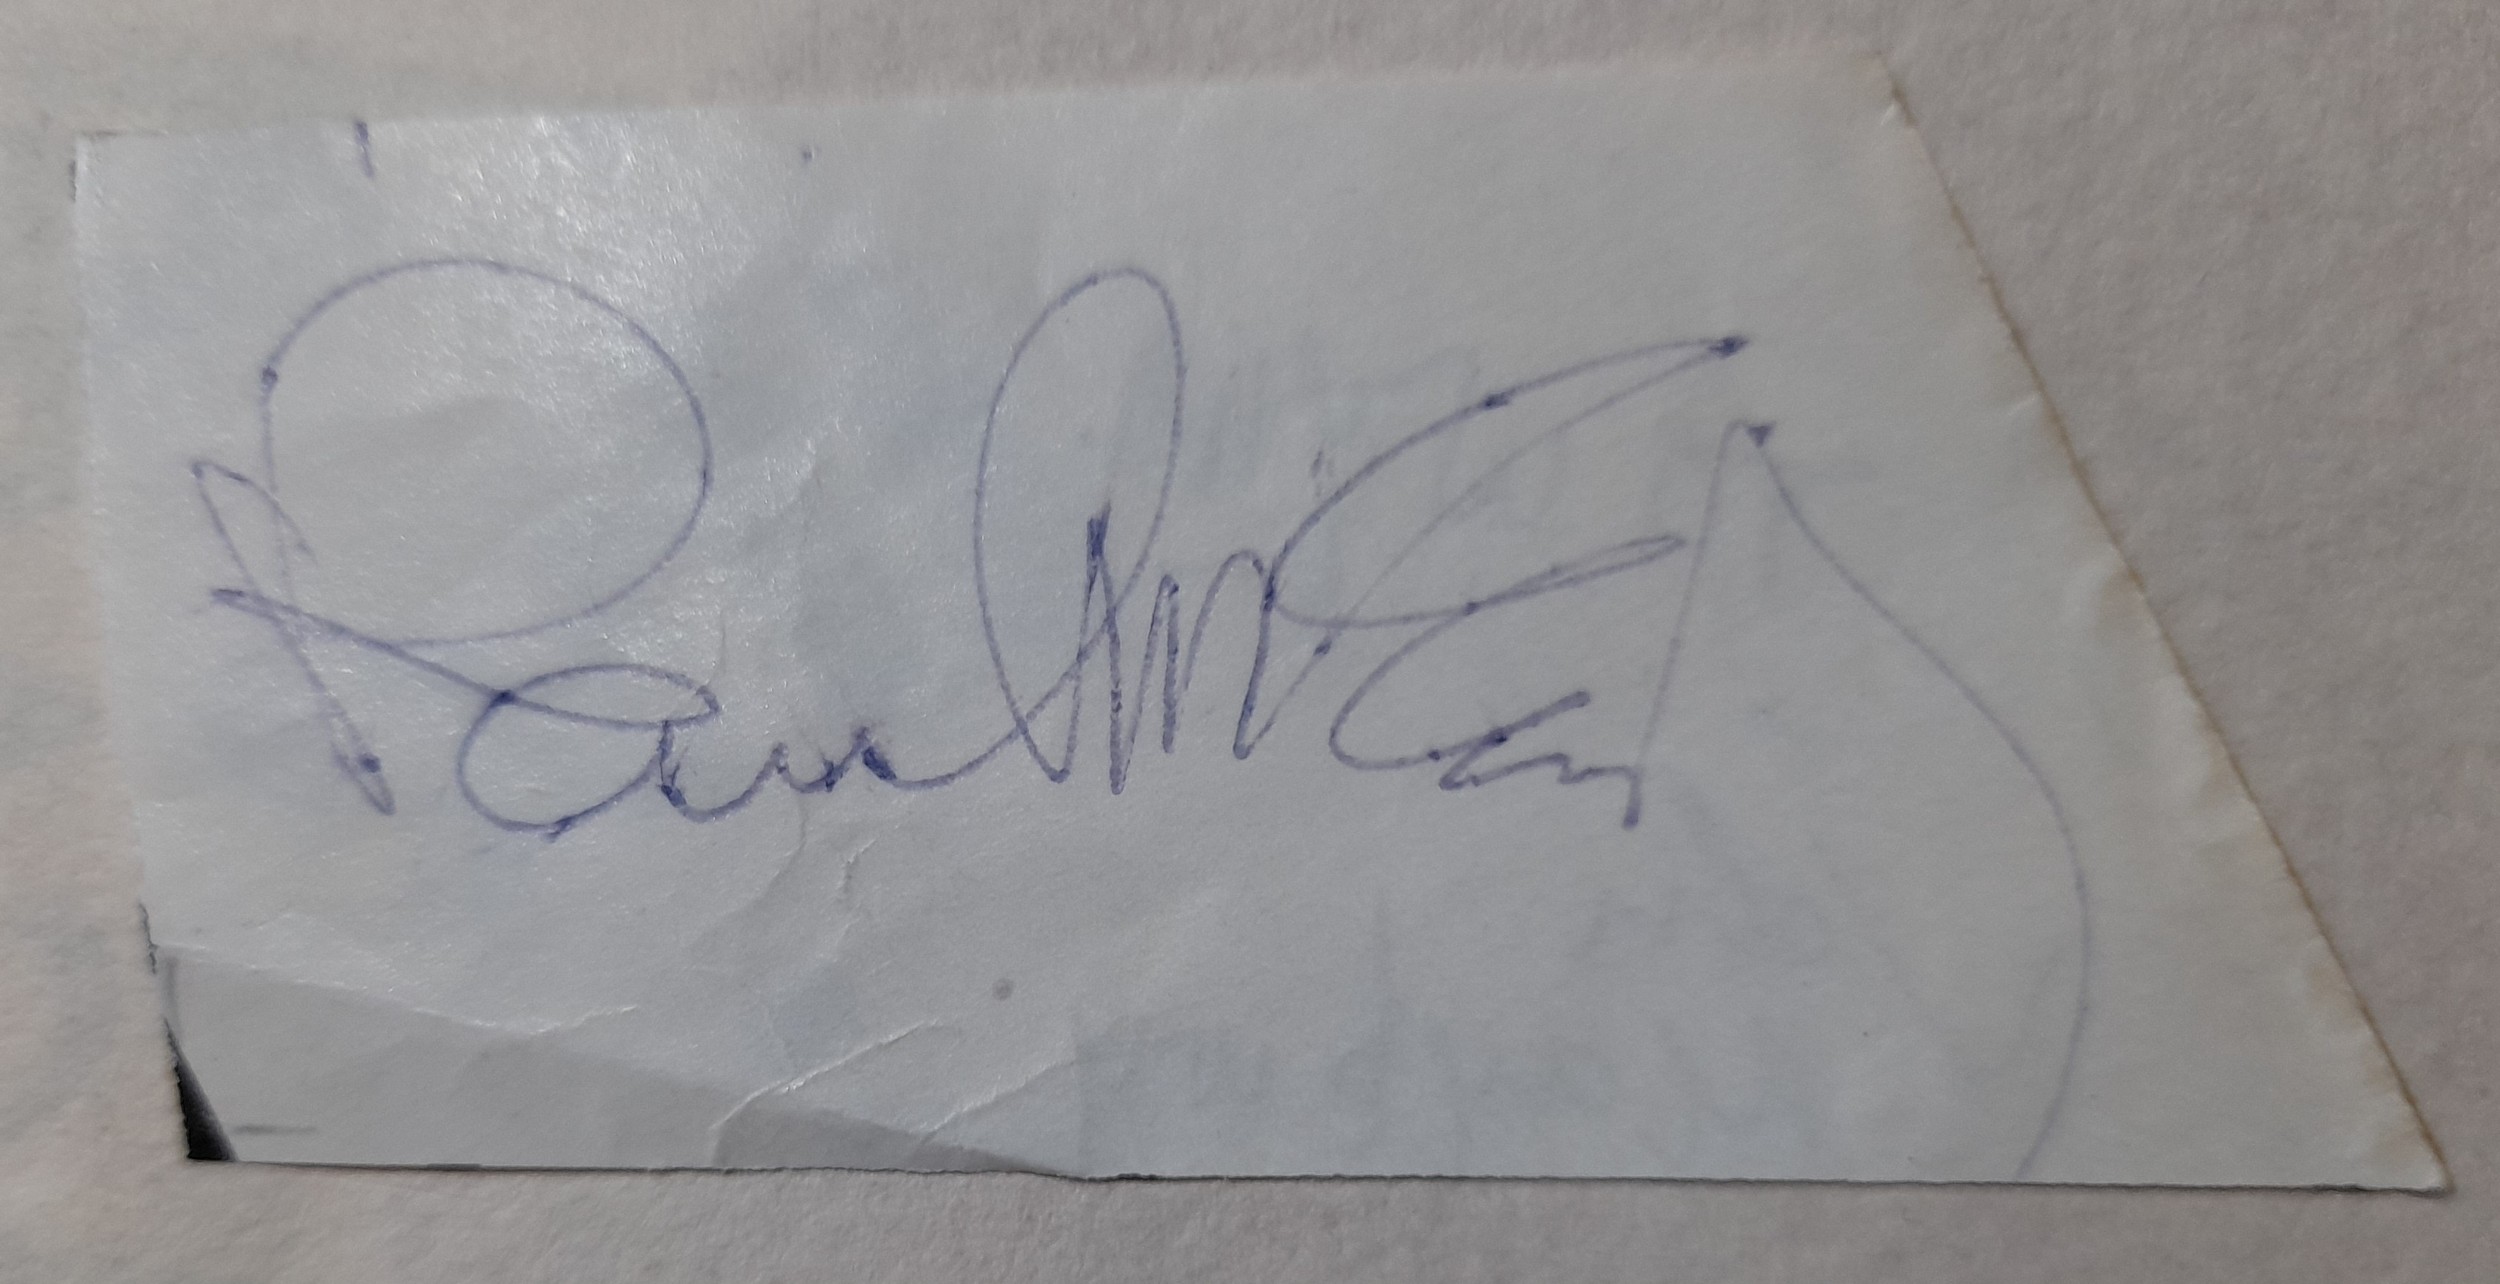 Clipped piece of paper signed by Paul McCartney